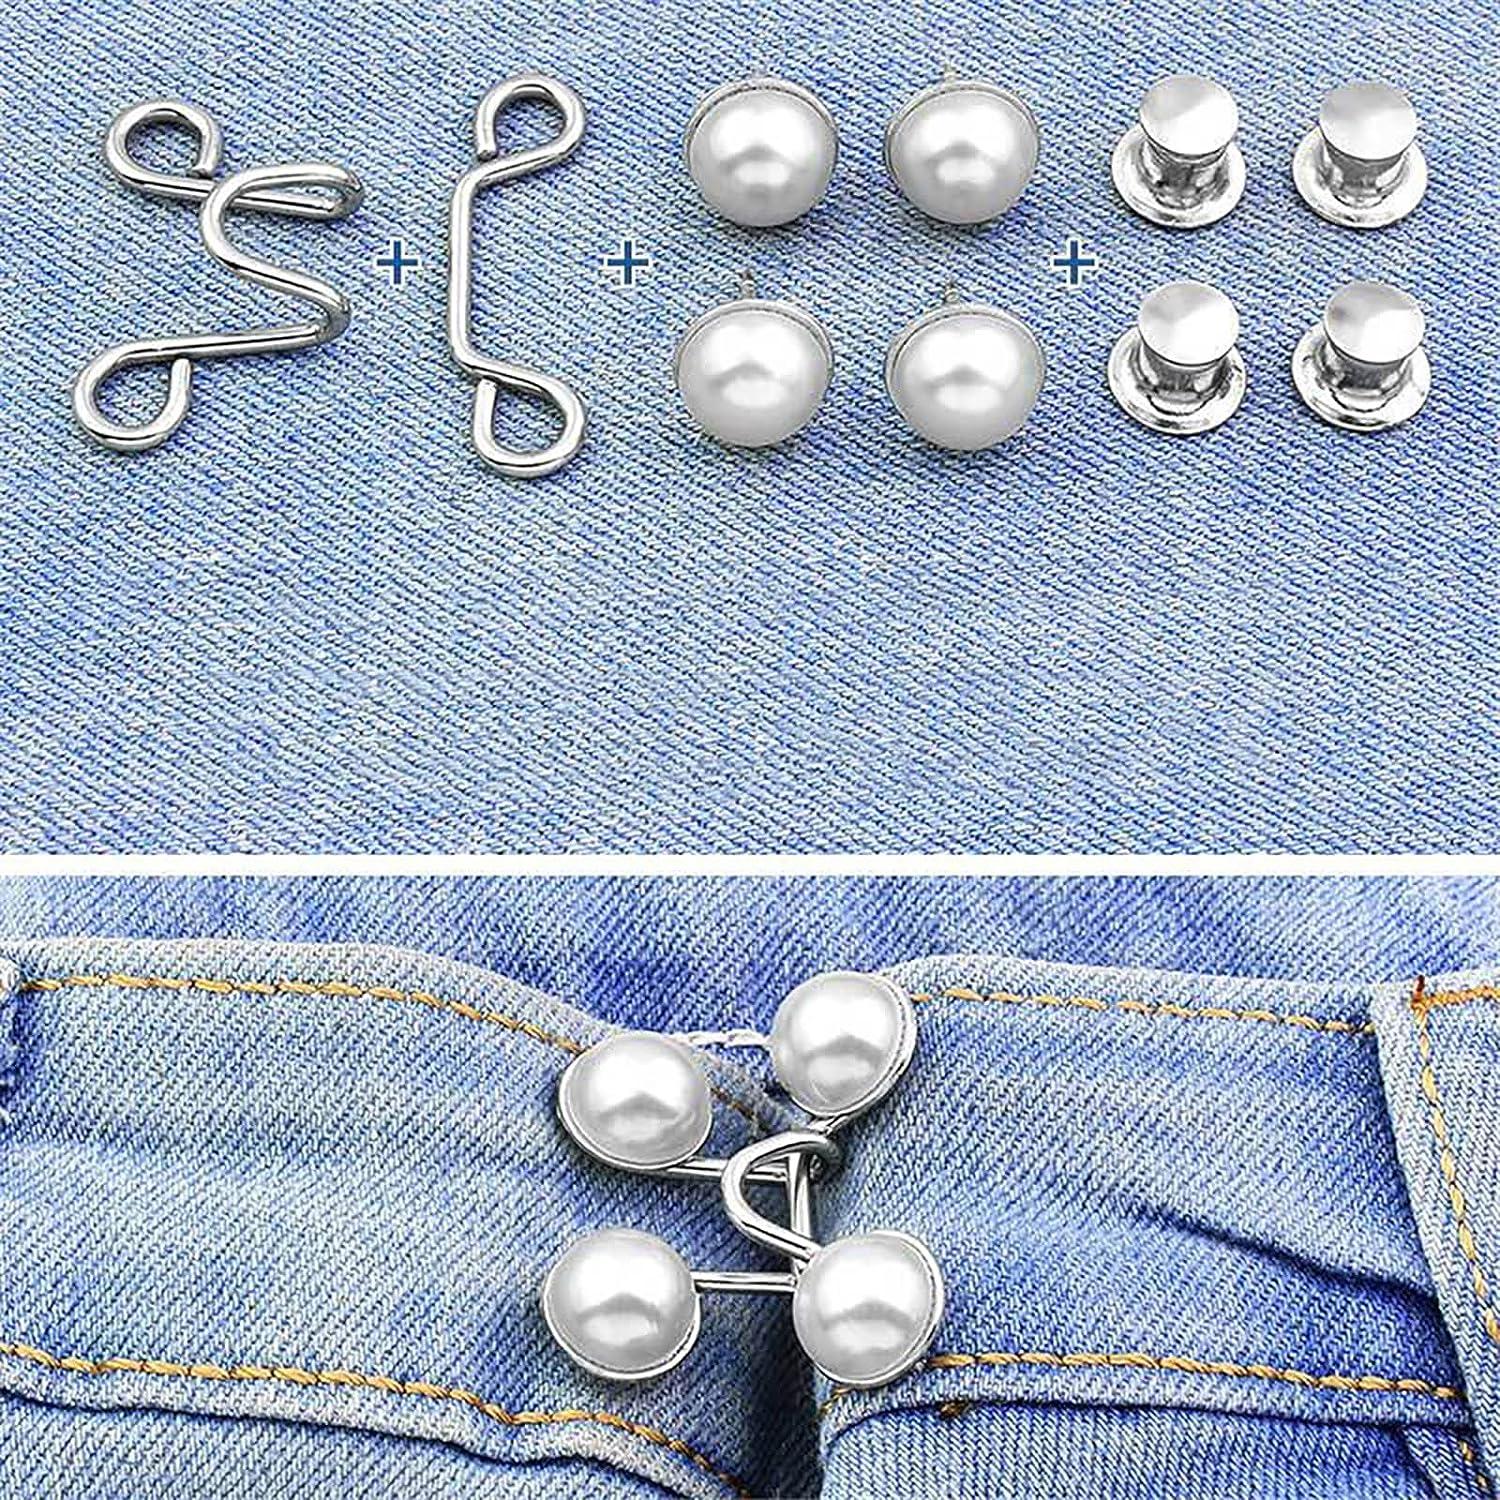  Qeuly 2 Sets Pant Waist Tightener Instant Jean Buttons for  Loose Jeans Pants Clips for Waist Detachable Jean Buttons Pins No Sewing  Waistband Tightener(Silver) : Everything Else